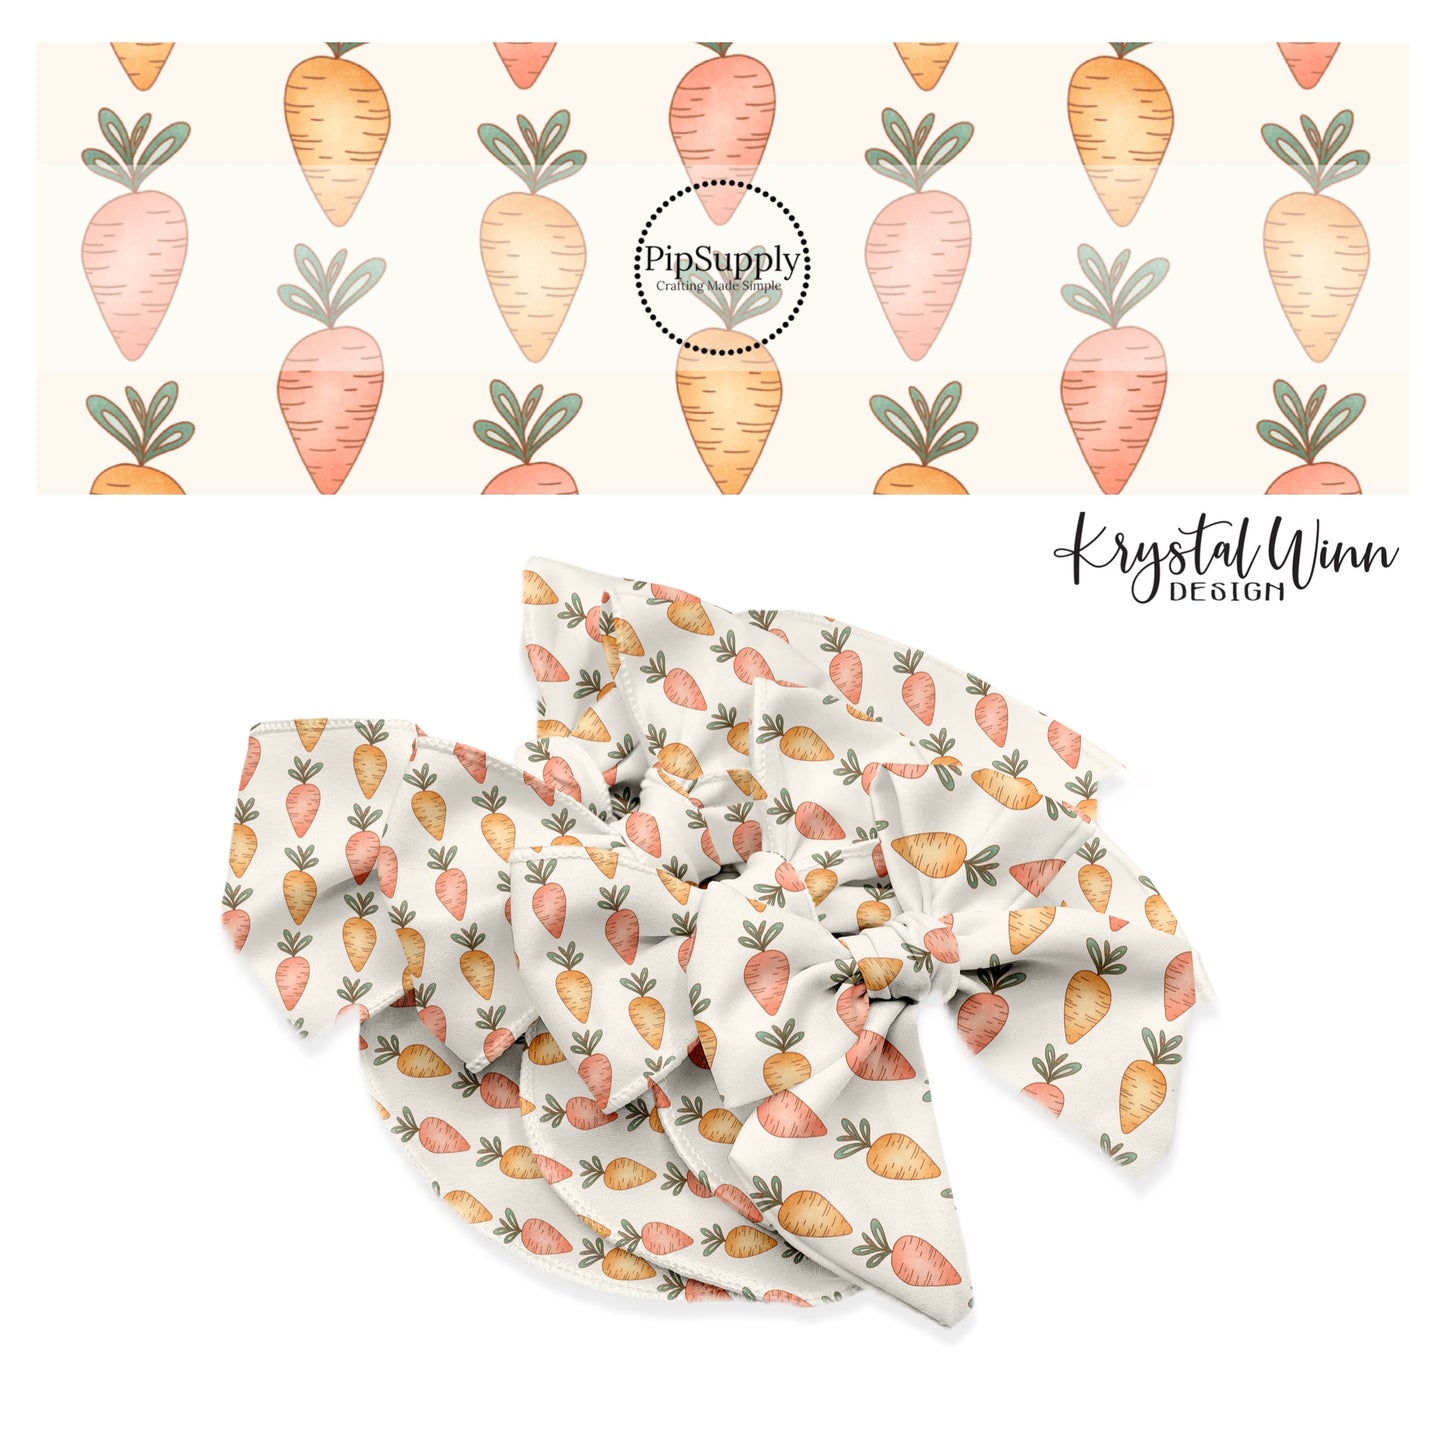 orange and peach rows of carrots on cream bows